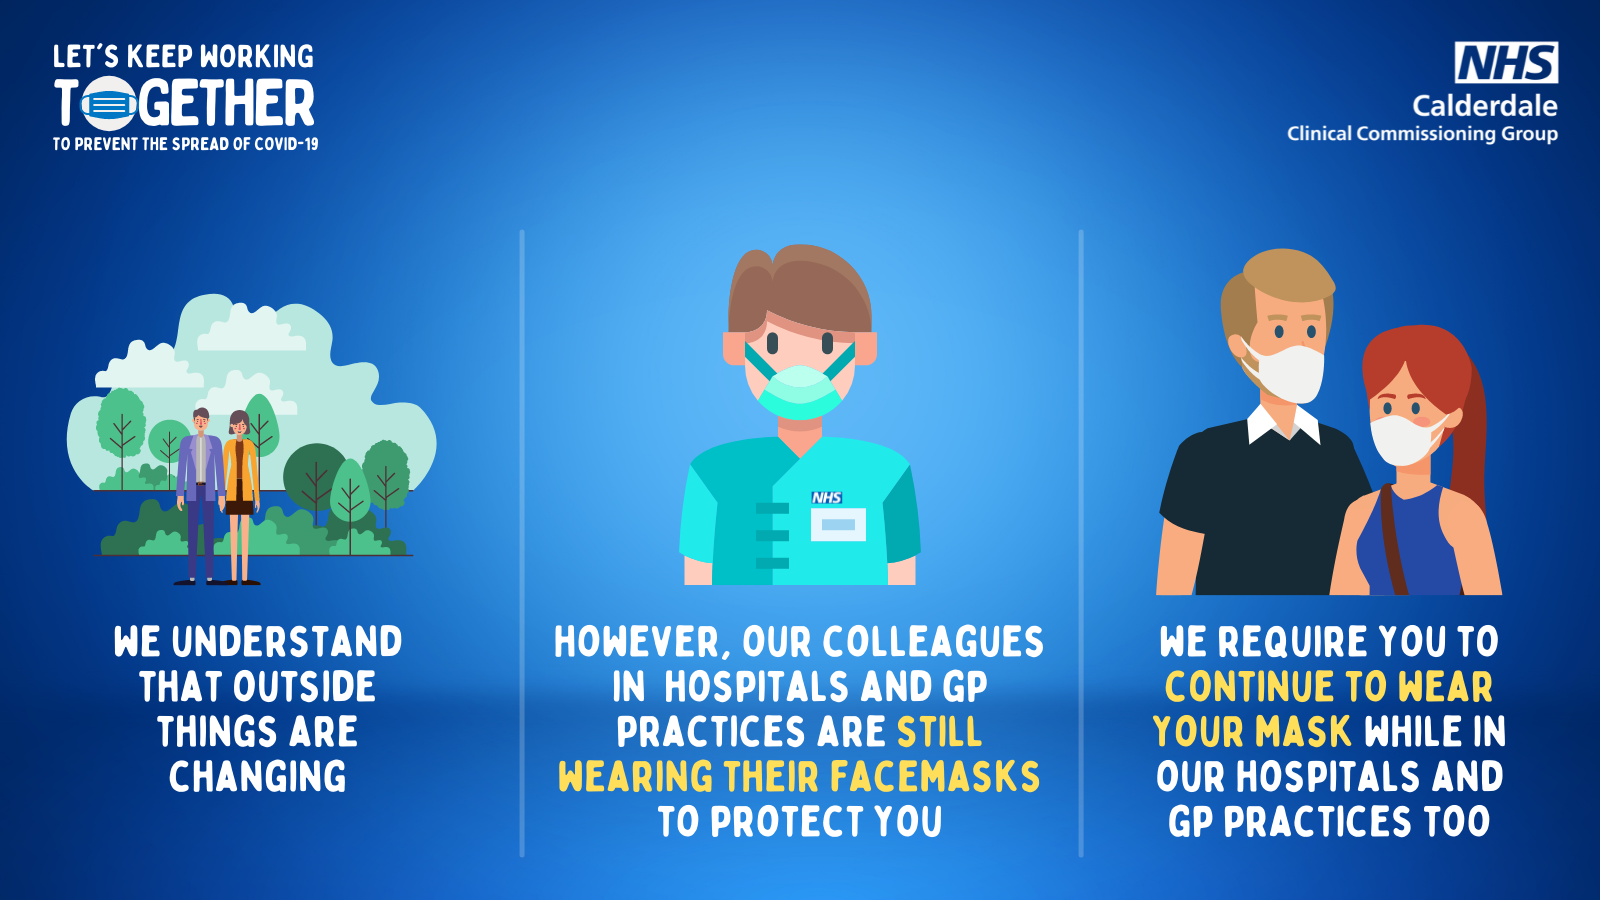 We understand that outside things are changing. However, our colleagues in hospitals and GP practices are still wearing their facemasks to protect you. We require you to continue to wear your mask while in our hospitals and gp practices too.